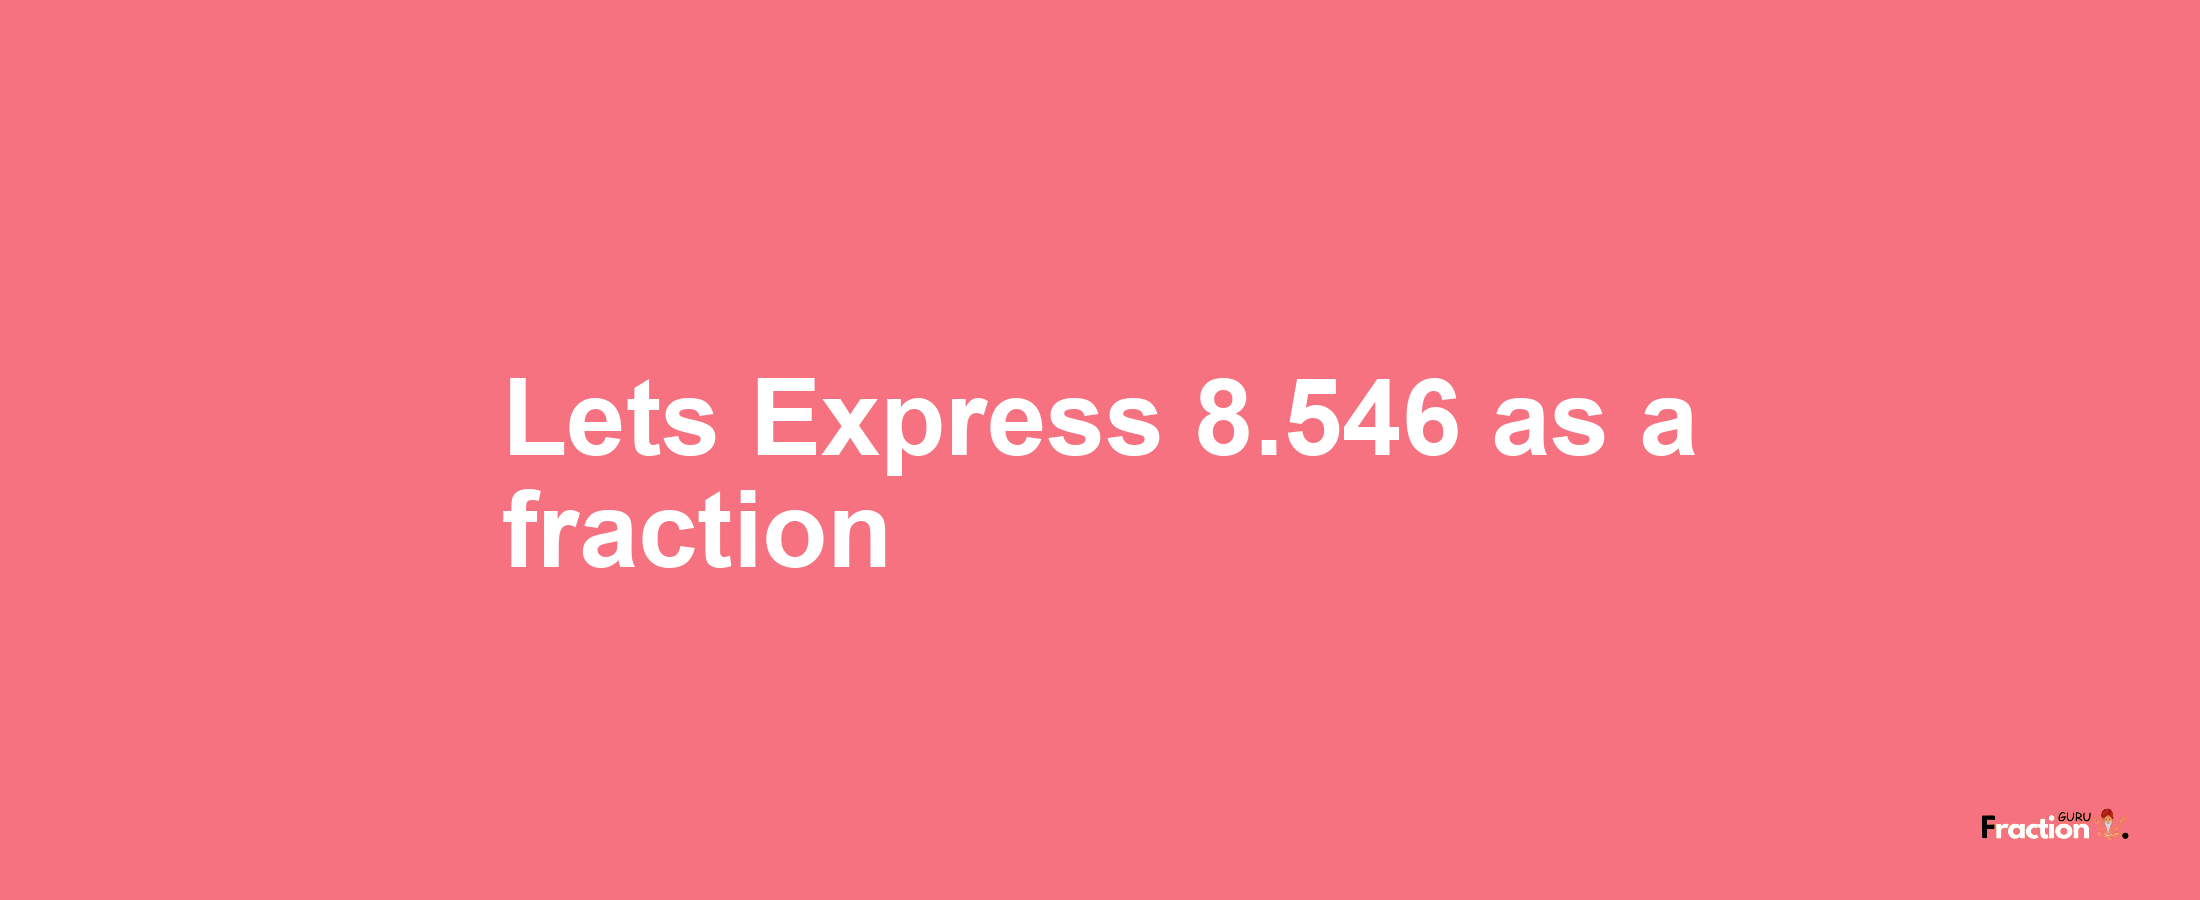 Lets Express 8.546 as afraction